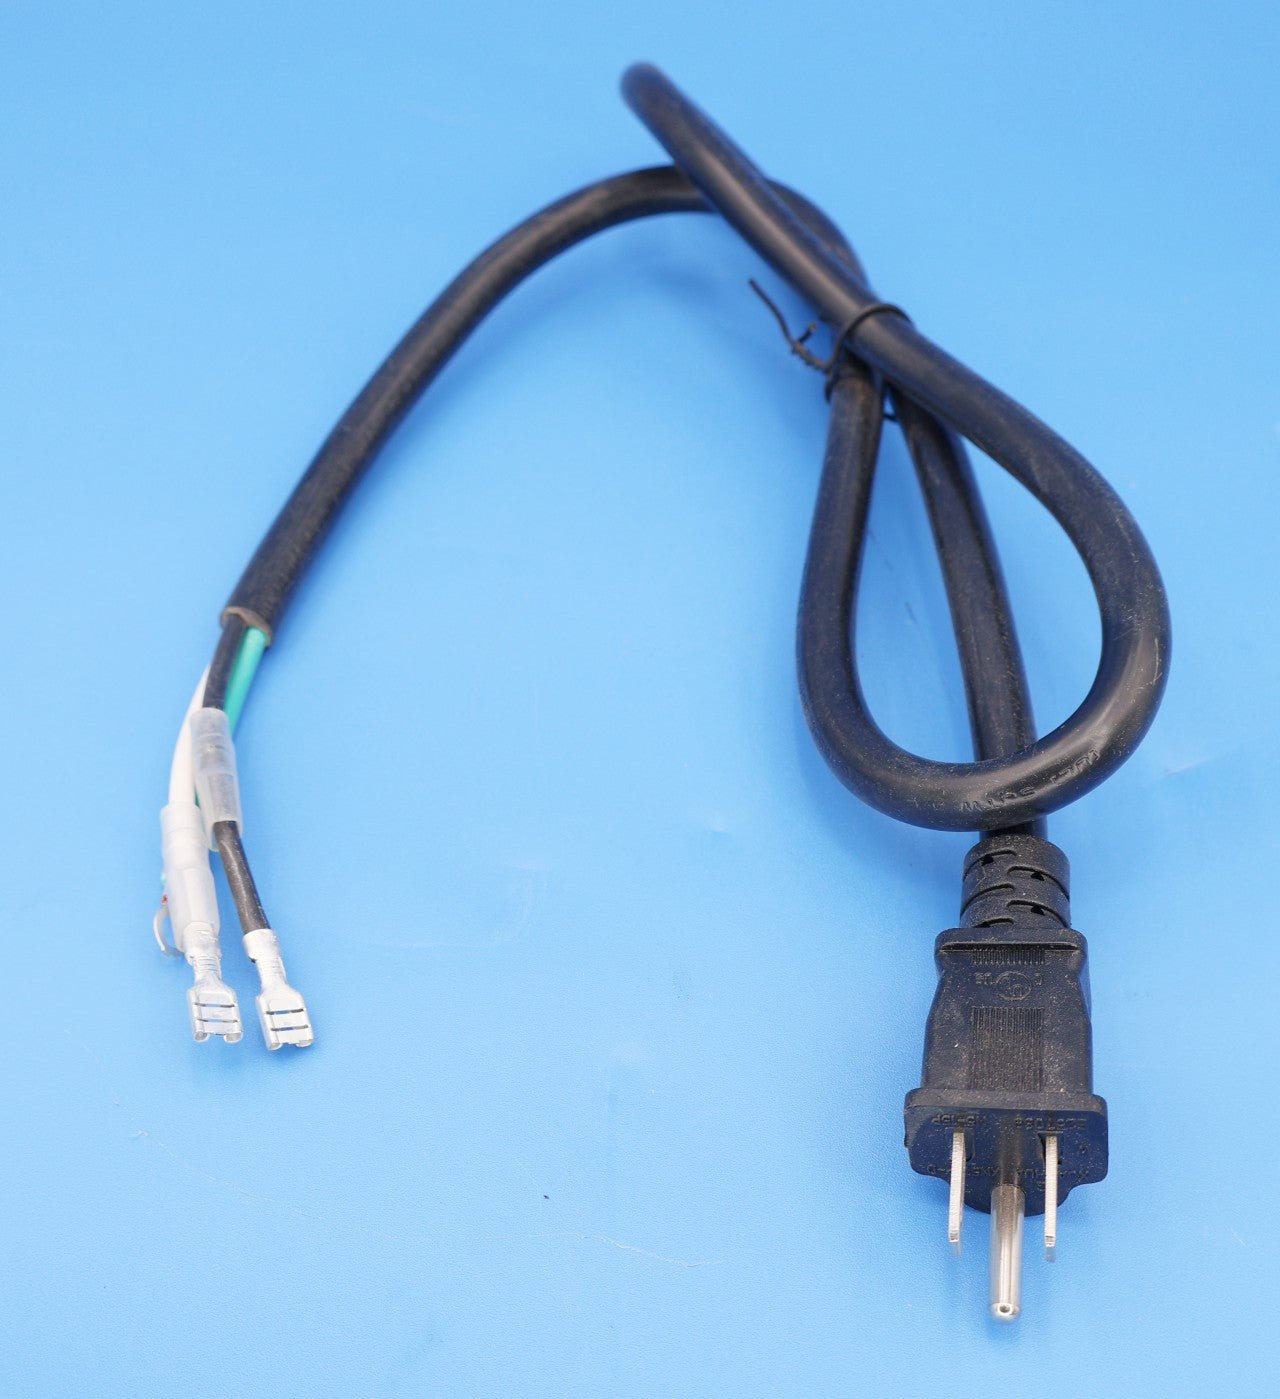 Jandy (Polaris) 3' Power Cord 12 Gauge 3-Wire for Forza Aboveground Pumps R0969300 - Pool Pump Parts - img-4